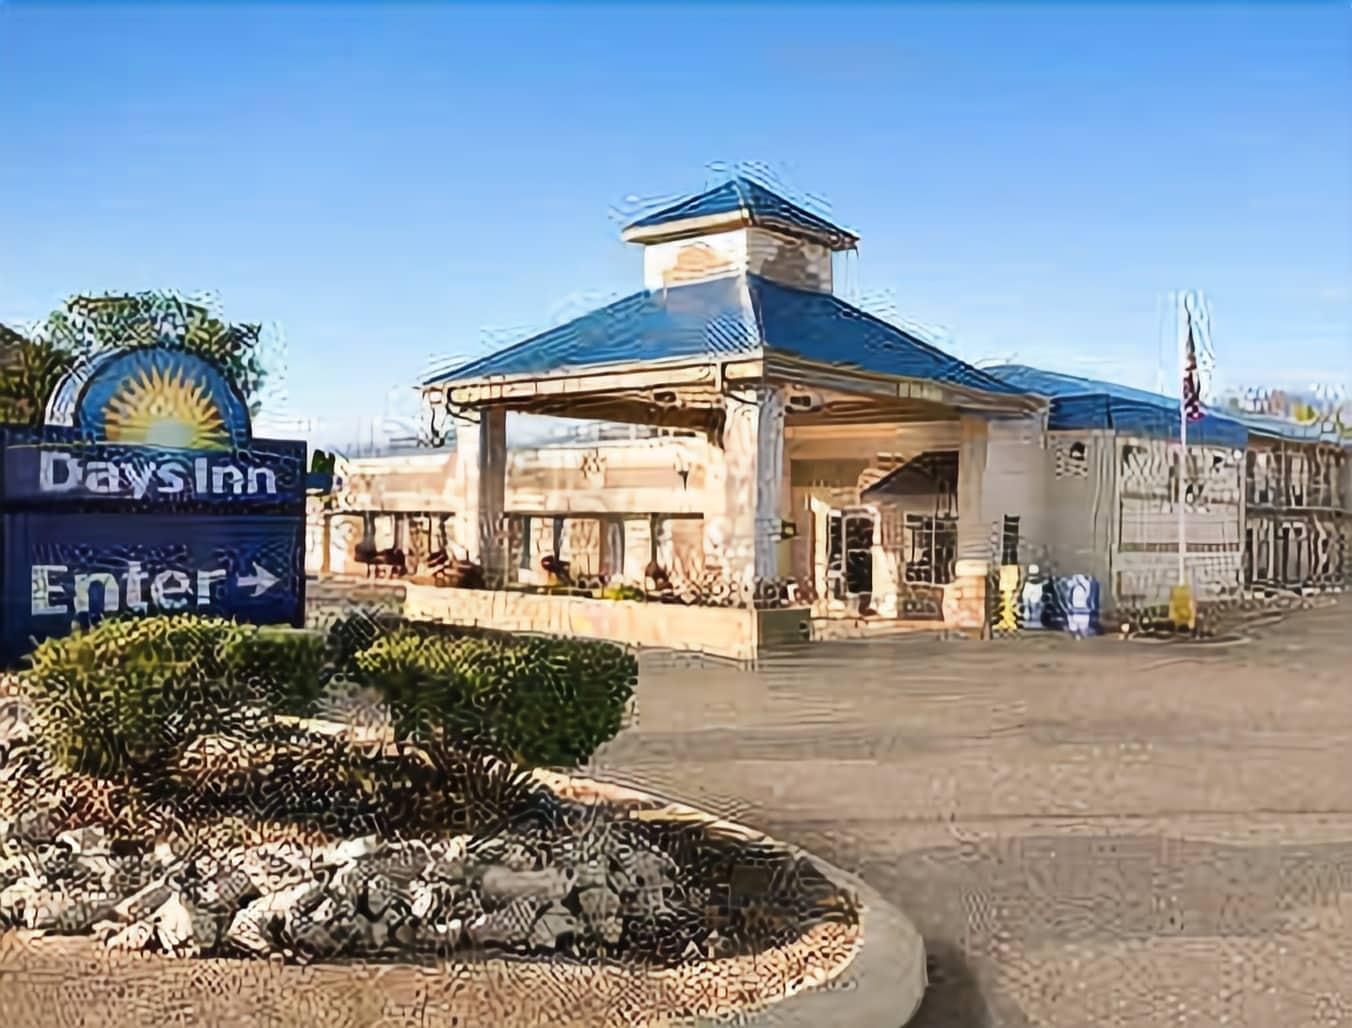 Days Inn by Wyndham Cookeville image